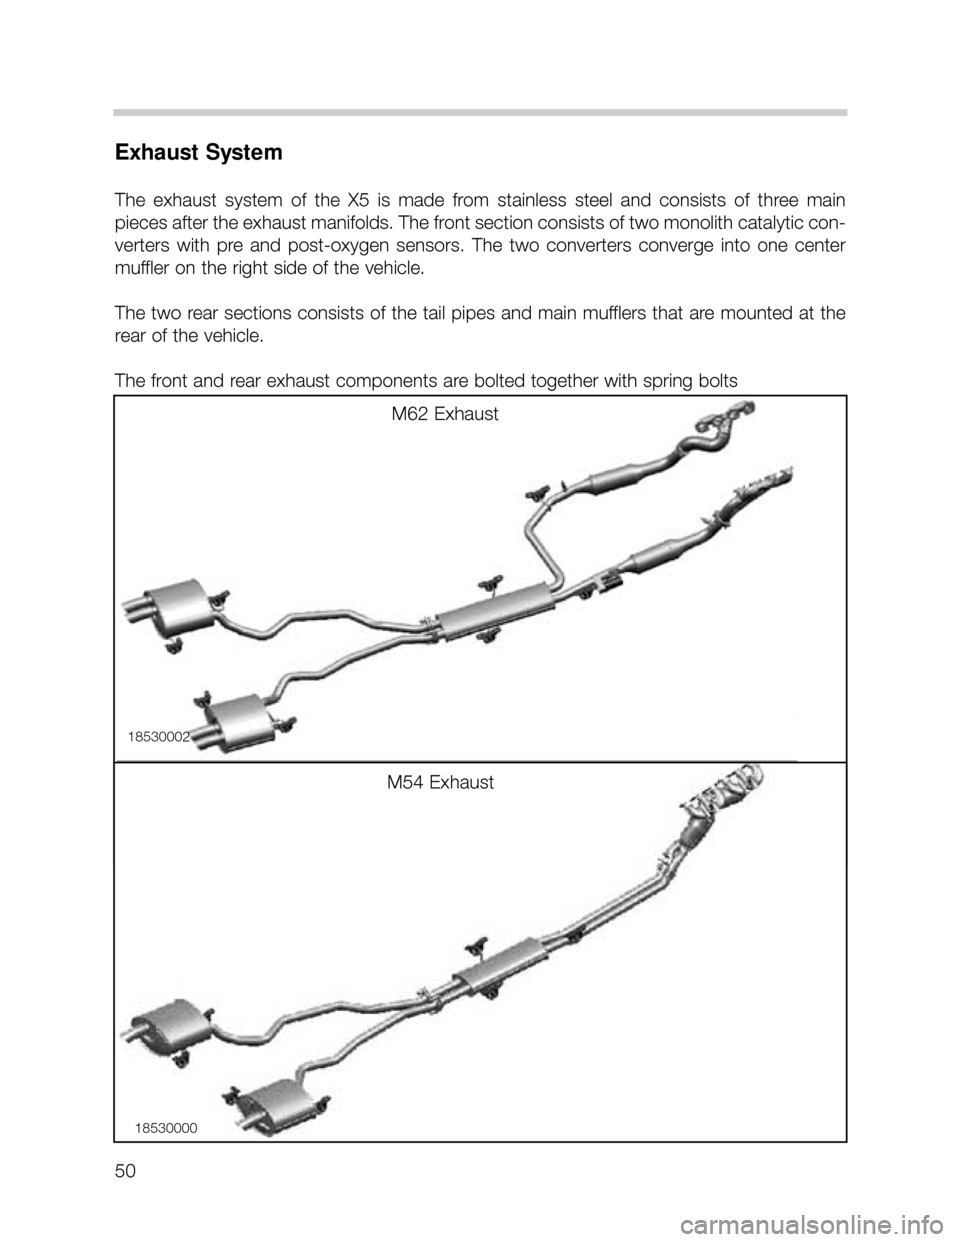 BMW X5 2002 E53 Service Manual 50
Exhaust System
The  exhaust  system  of  the  X5  is  made  from  stainless  steel  and  consists  of  three  main
pieces after the exhaust manifolds. The front section consists of two monolith cat